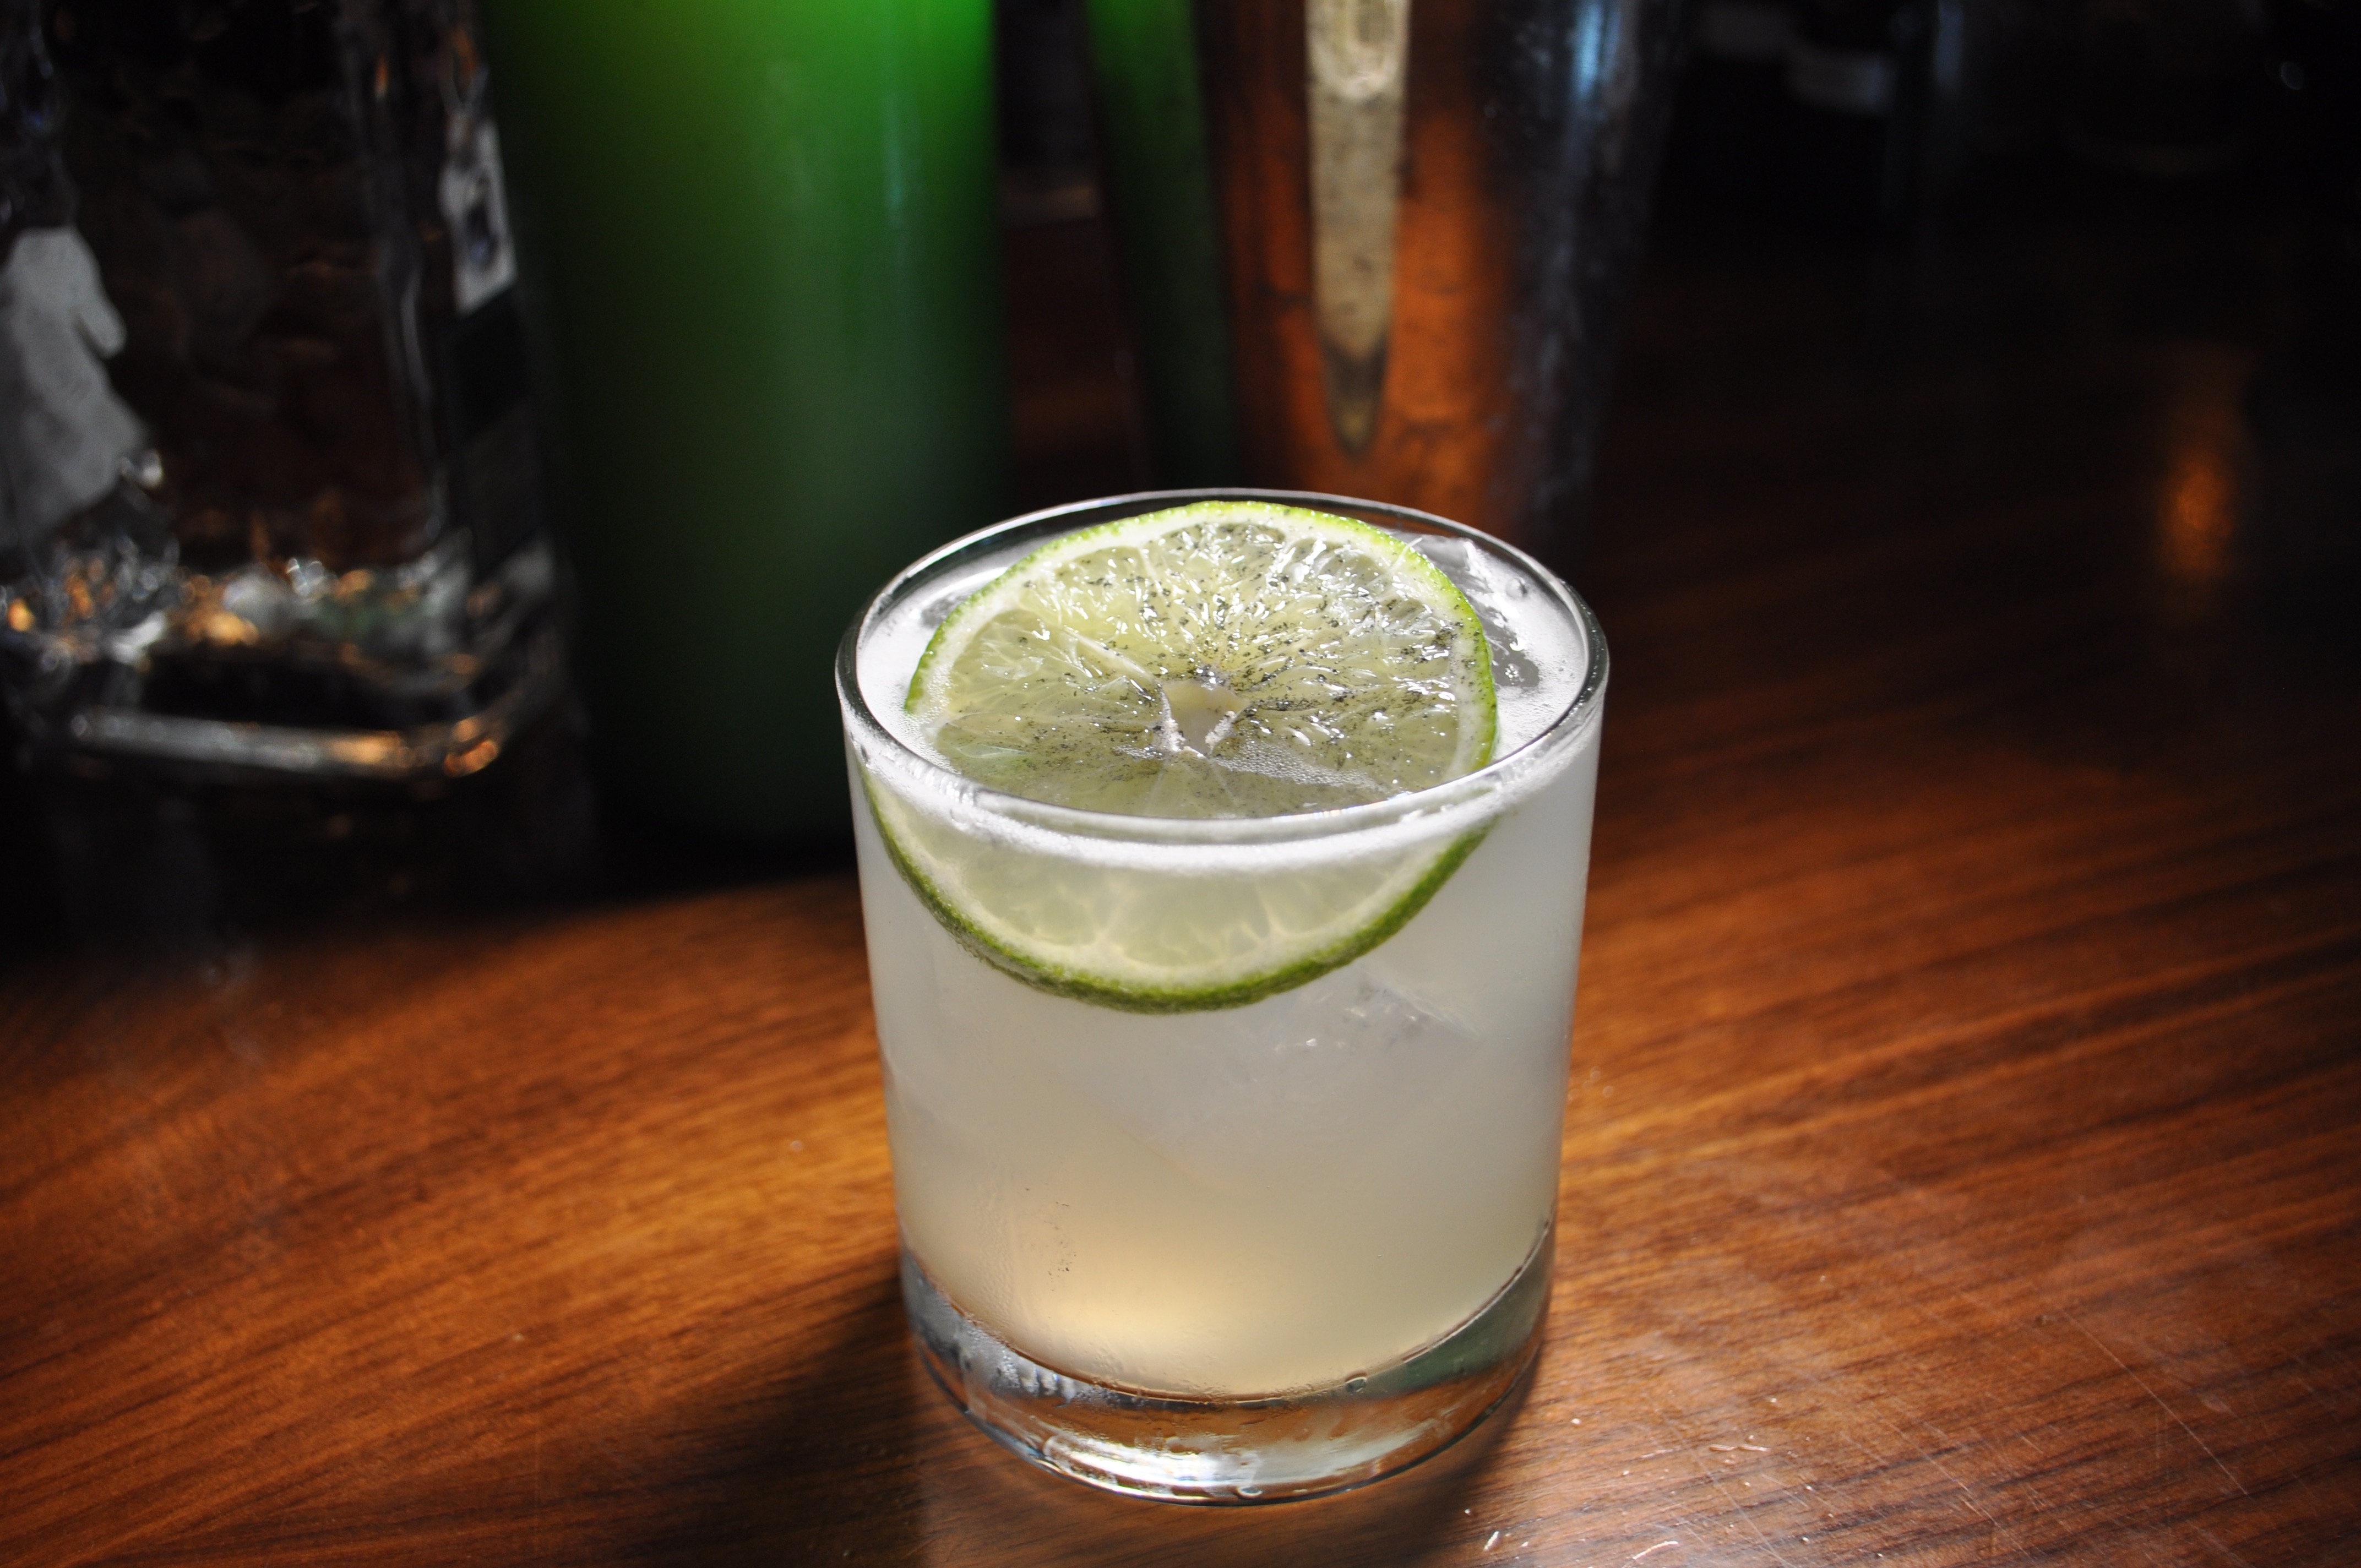 Invented more than 20 years ago, this industry favorite is made with fresh agave, Blanco tequila, and fresh lime juice.